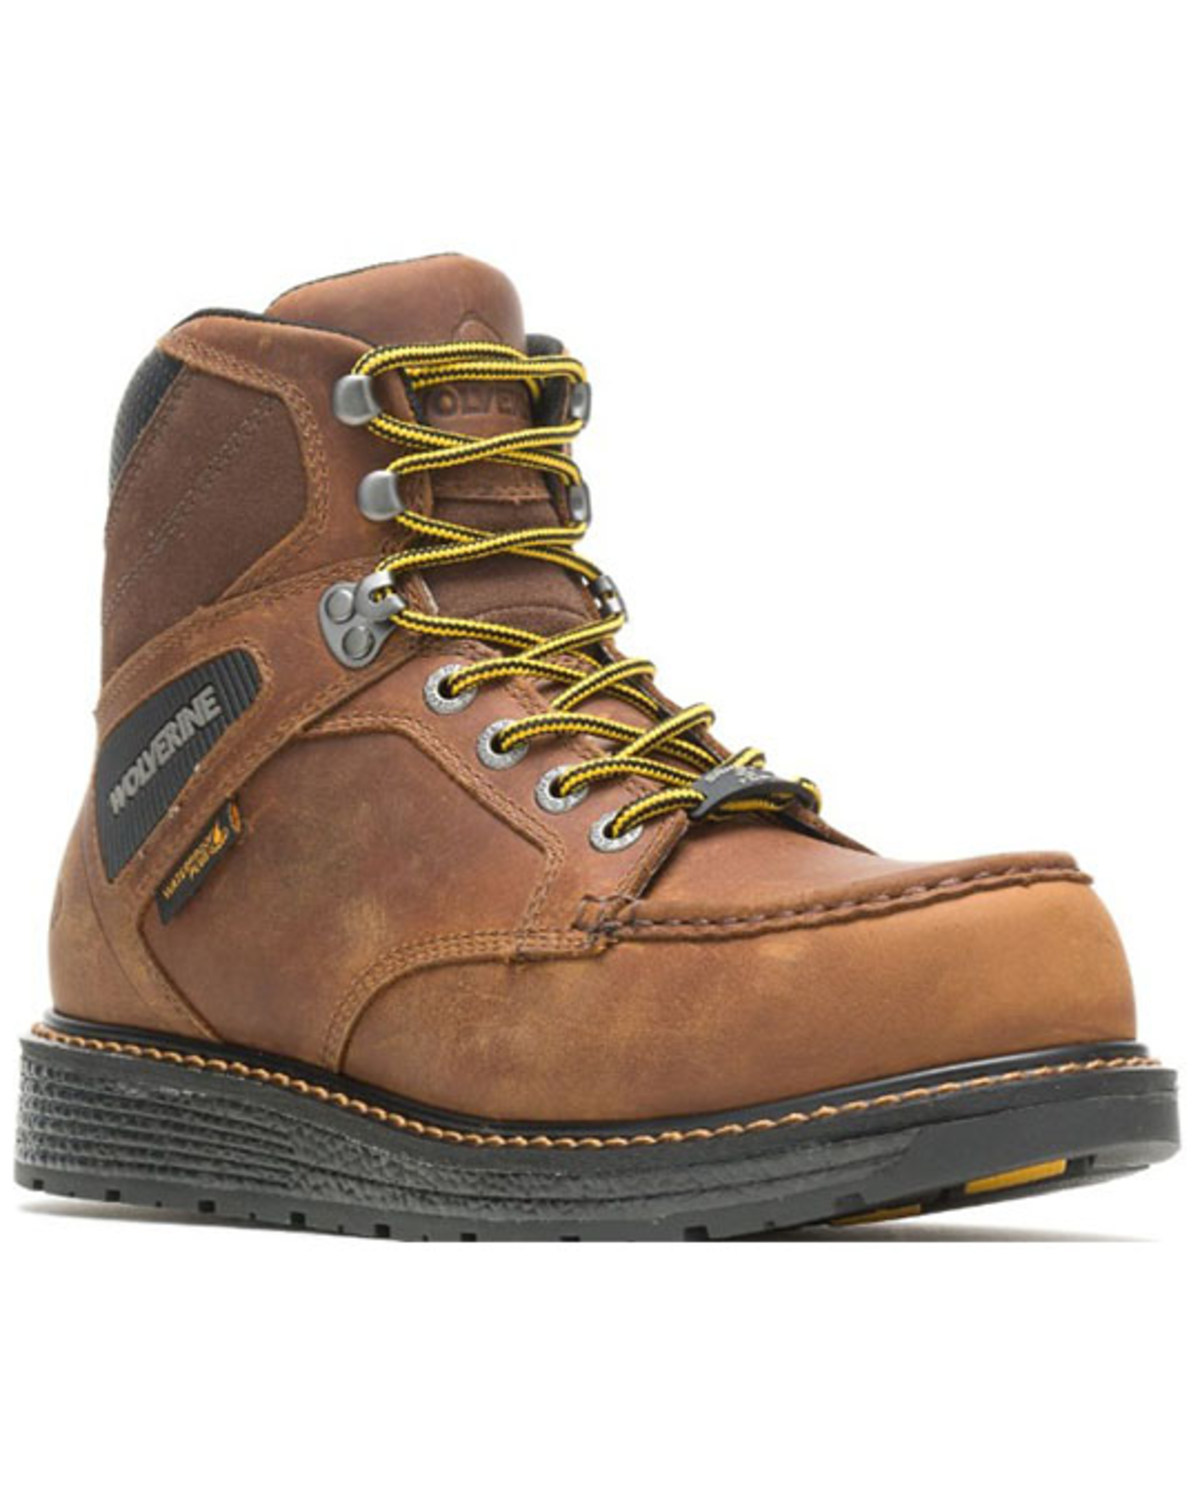 Wolverine Men's Brown Hellcat Lace-Up Work Boots - Composite Toe